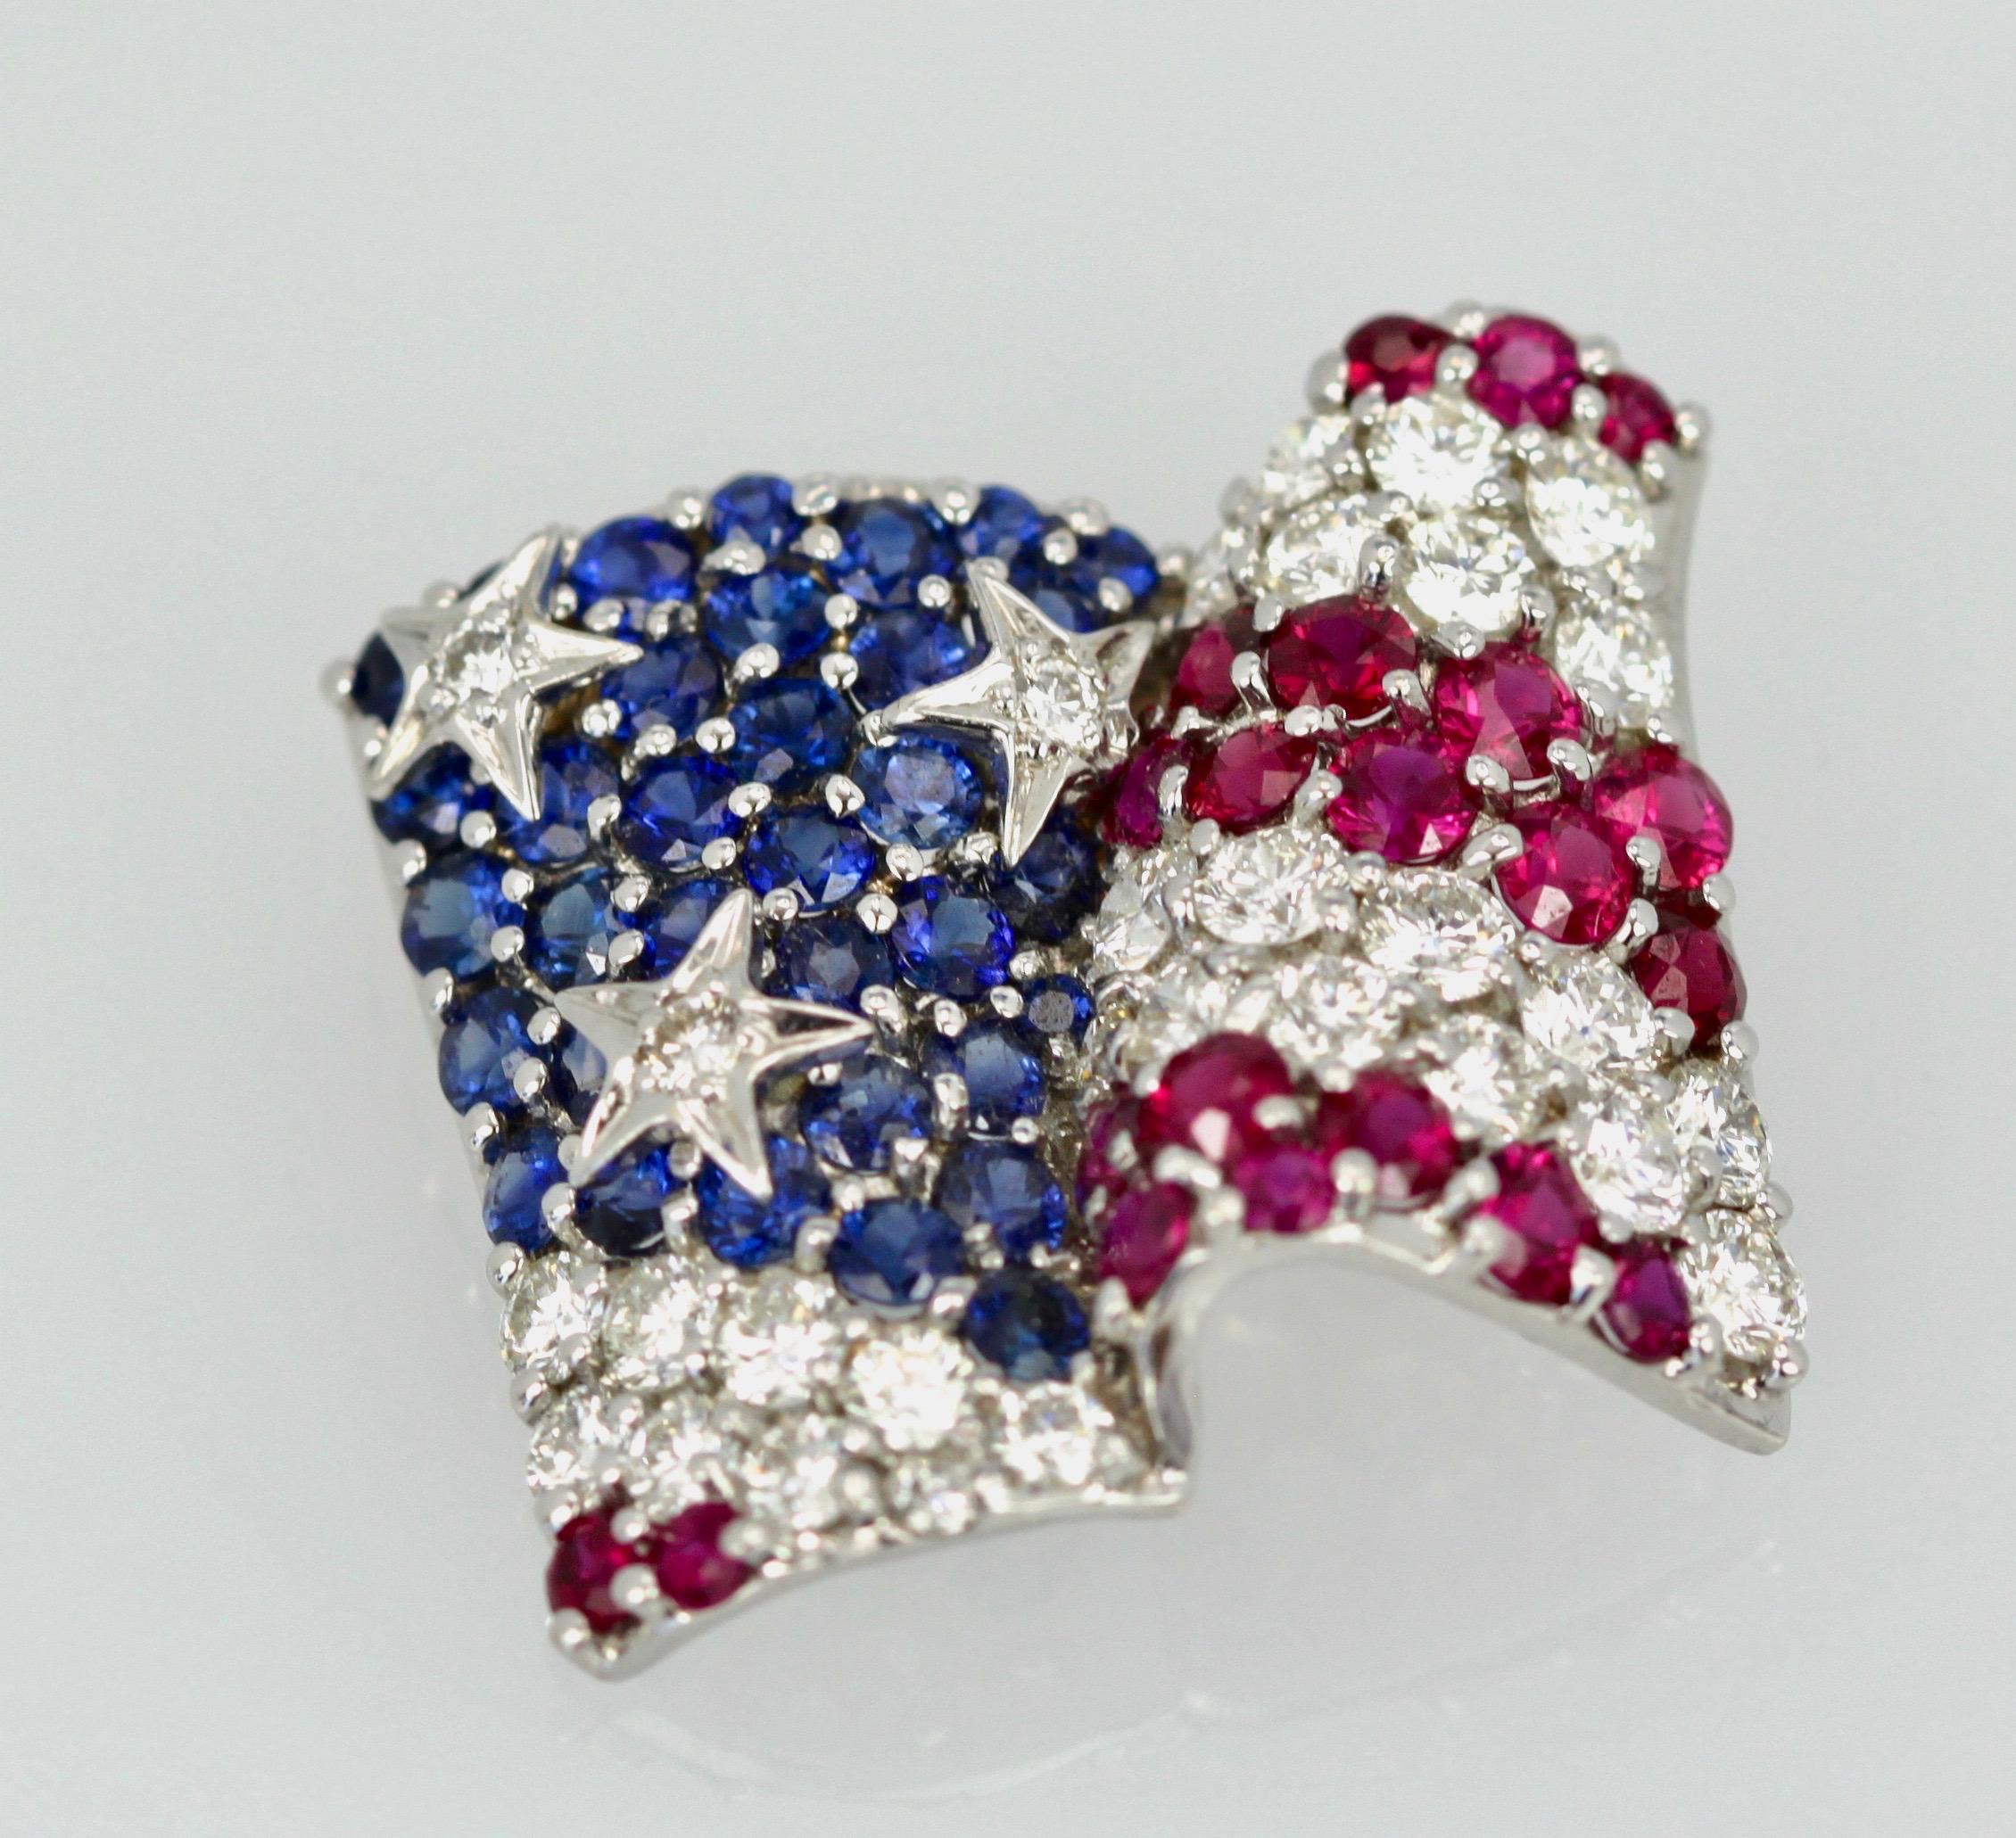 This iconic waving flag brooch is the most recognized piece by famed designer Jean Vitau. This brooch is absolutely gorgeous. The Diamonds are color grade F and clarity is VS.  The Sapphires are translucent and deep blue the Rubies are bright red